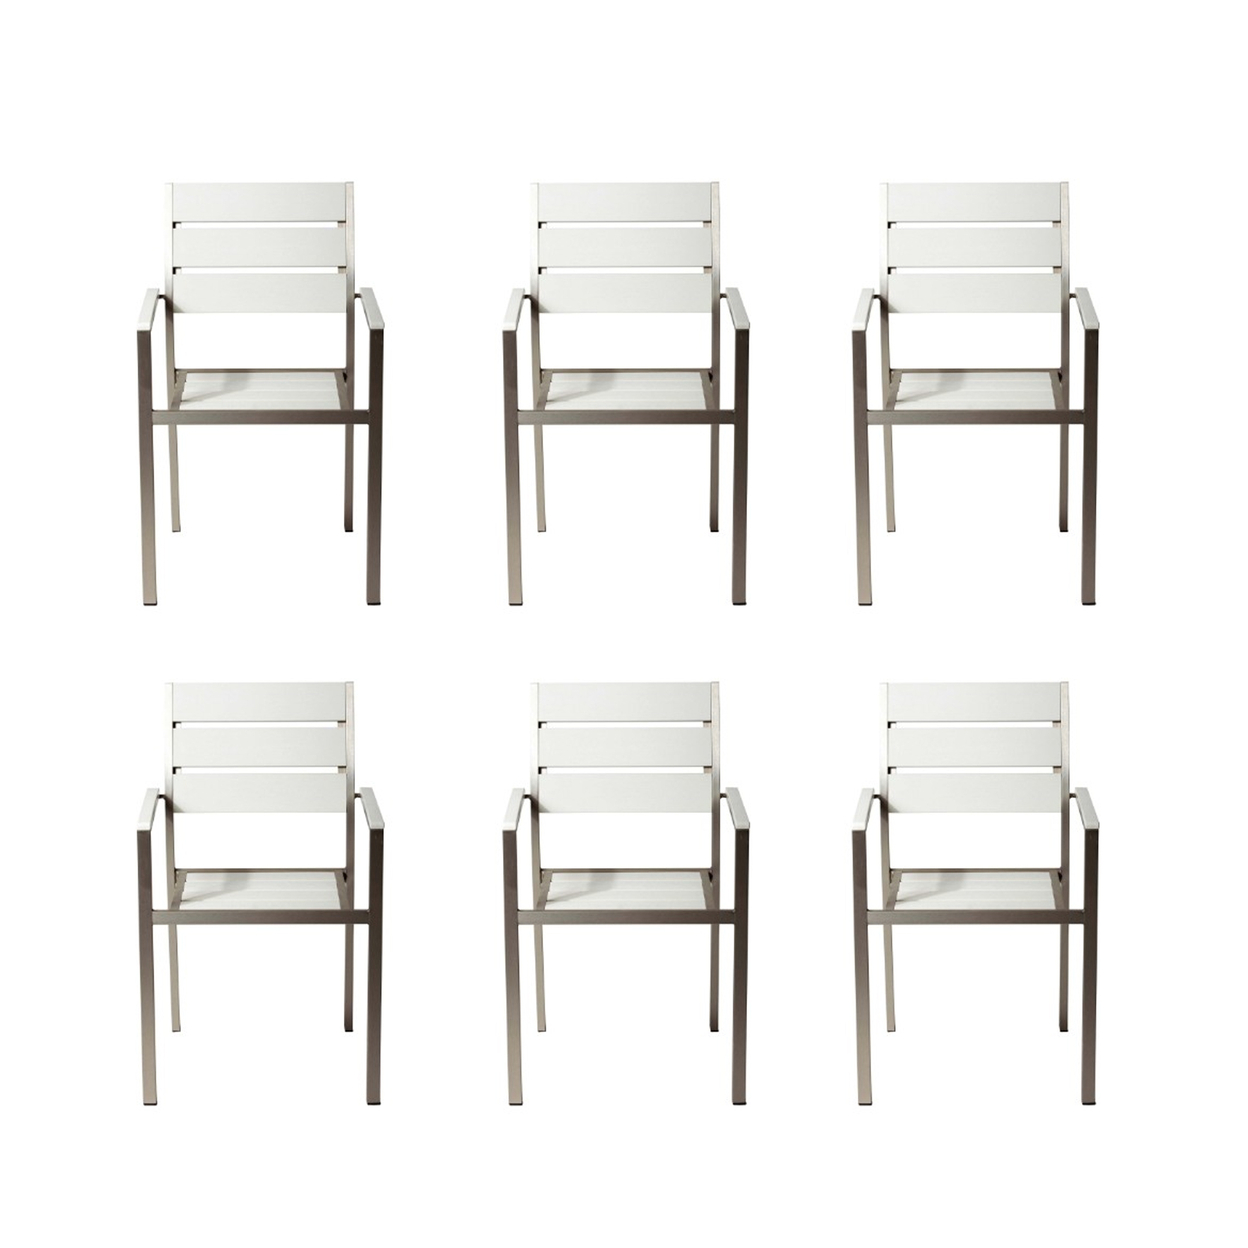 Modern Style Metal Chairs With Slated Back Set Of 6 Gray And White- Saltoro Sherpi